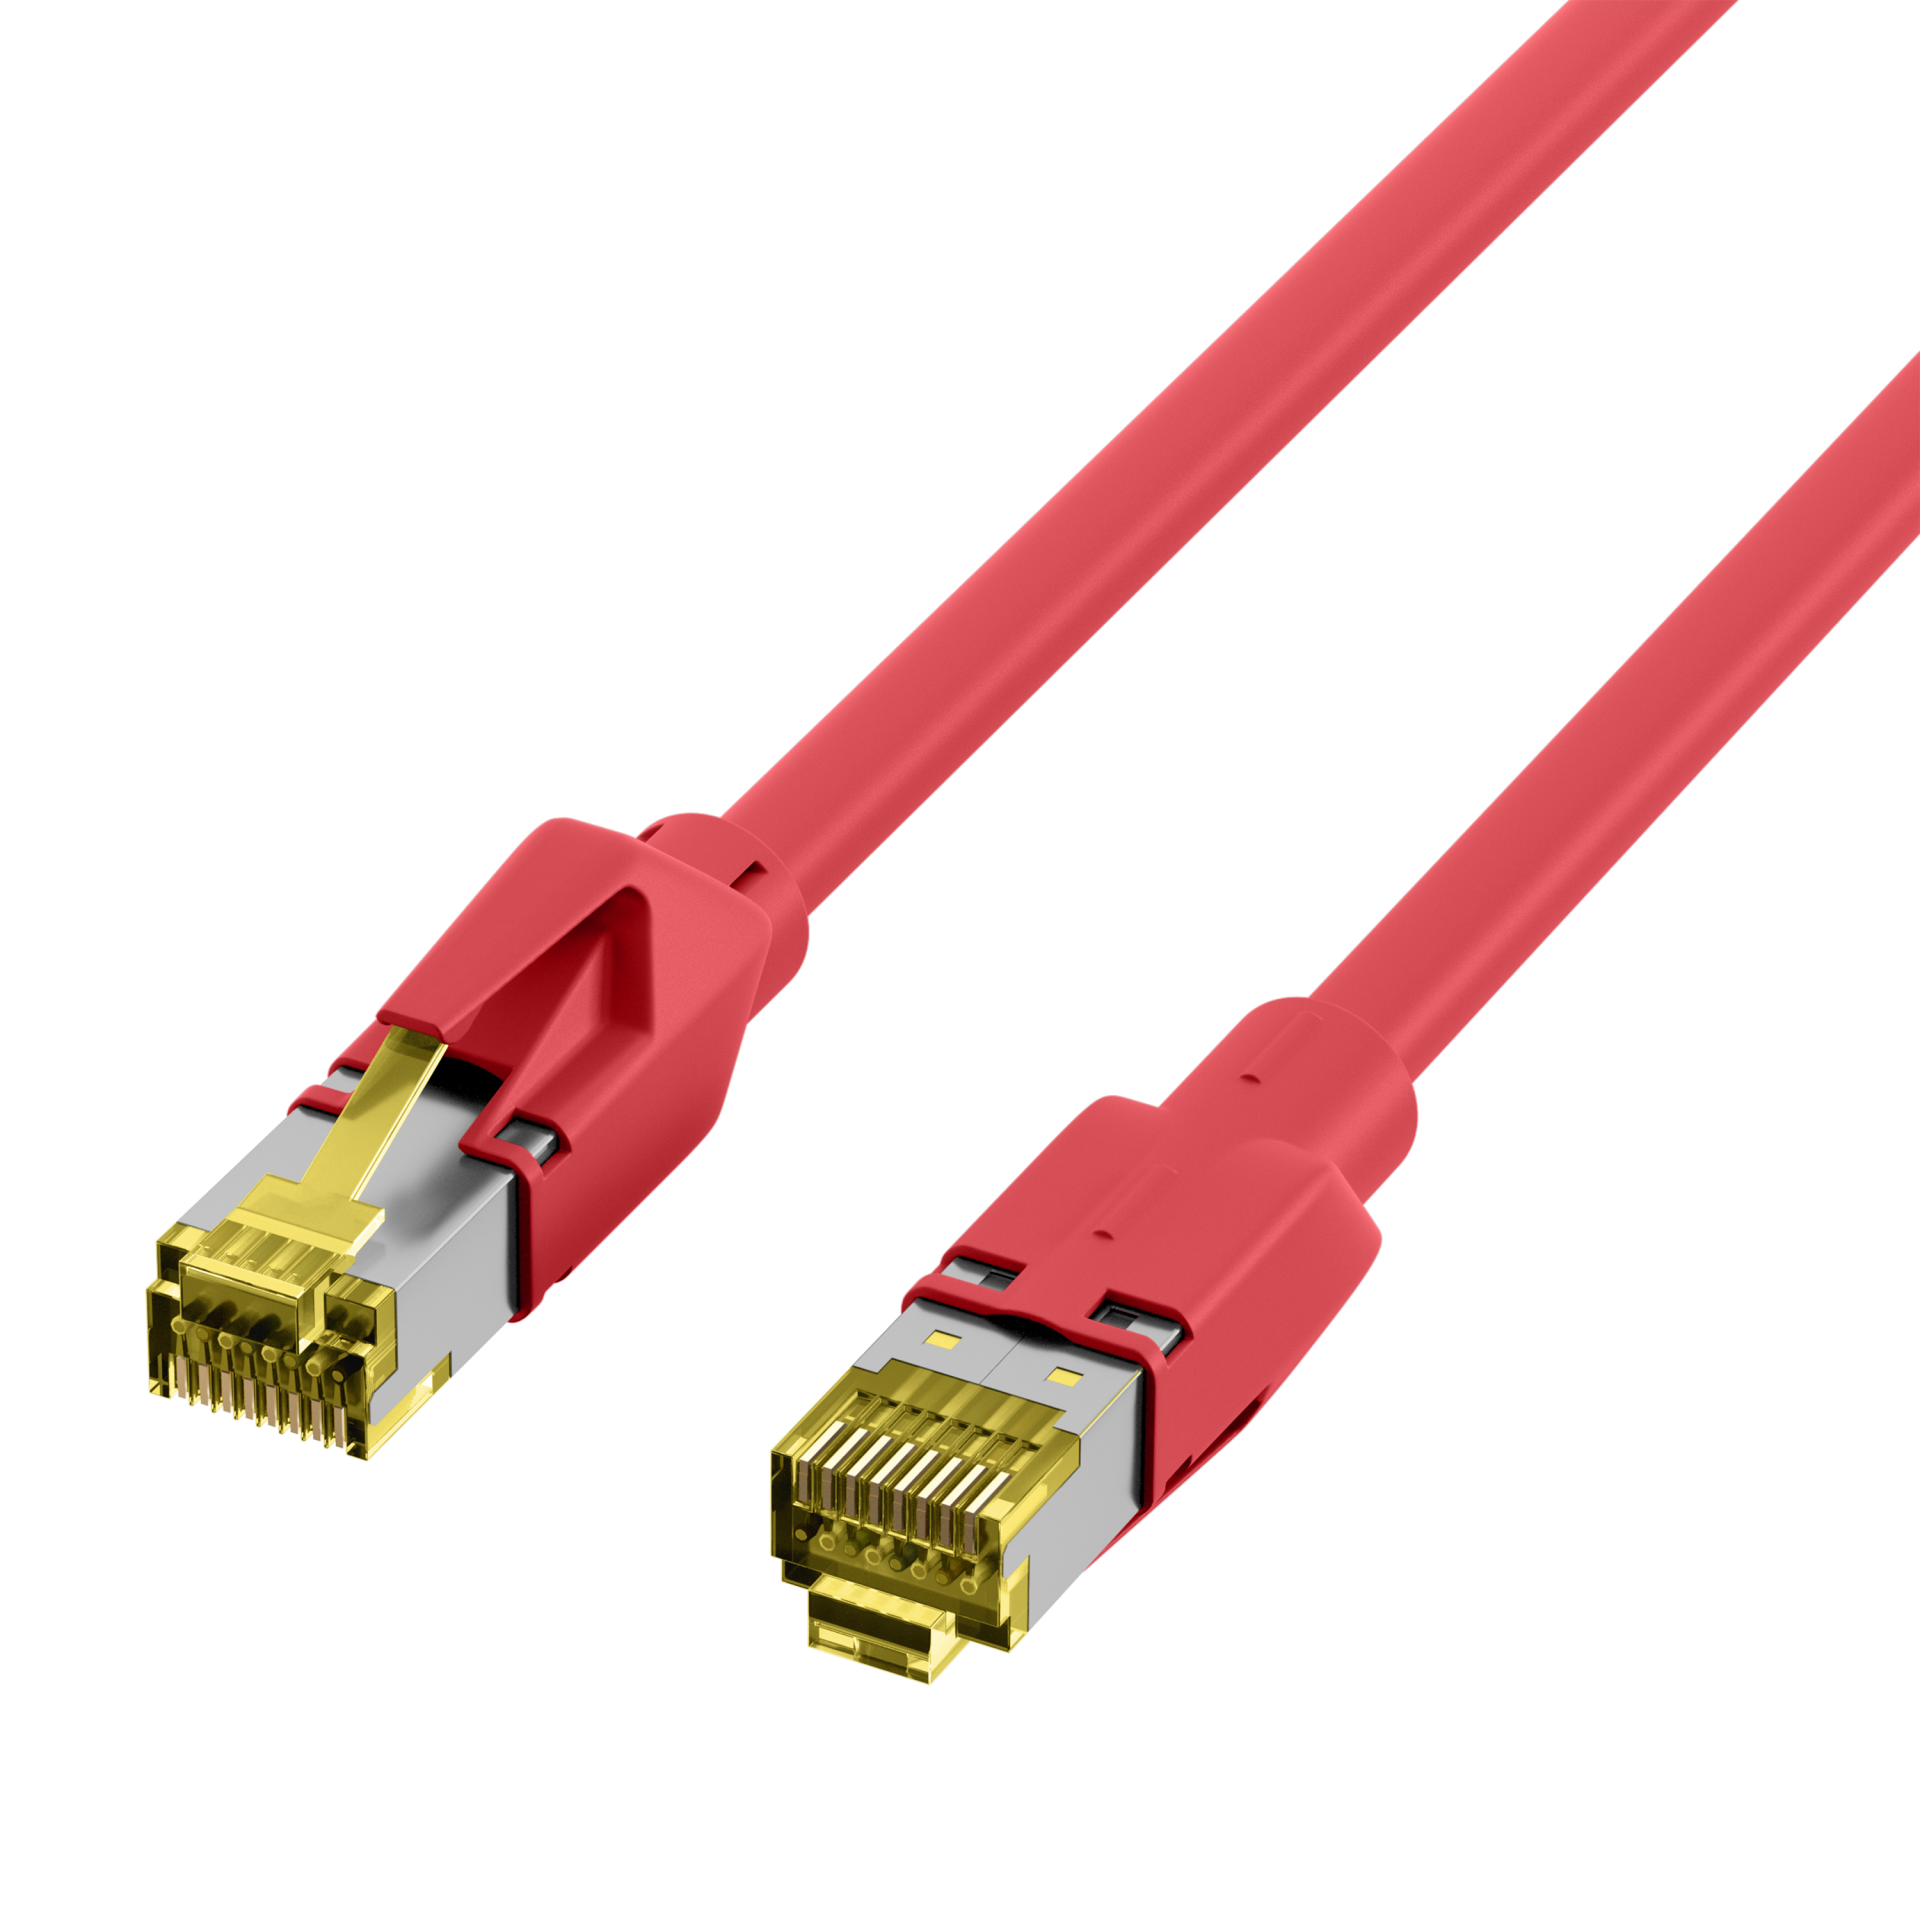 INFRALAN® RJ45 patch cord S/FTP, Cat.6A, TM31, UC900, 5m, red